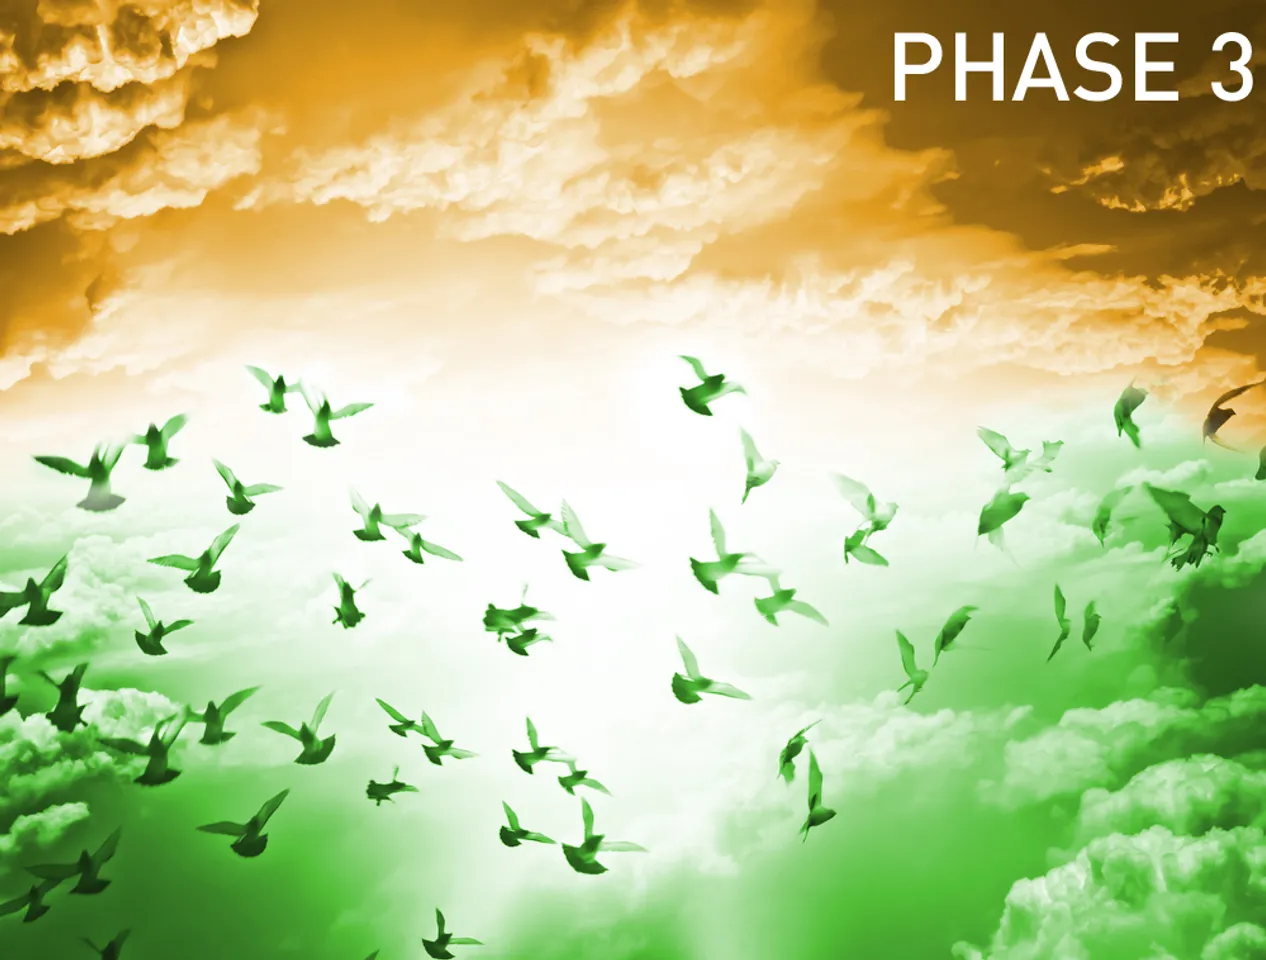 Phase 3 - If Indian Independence was fought in the Era of Social Media